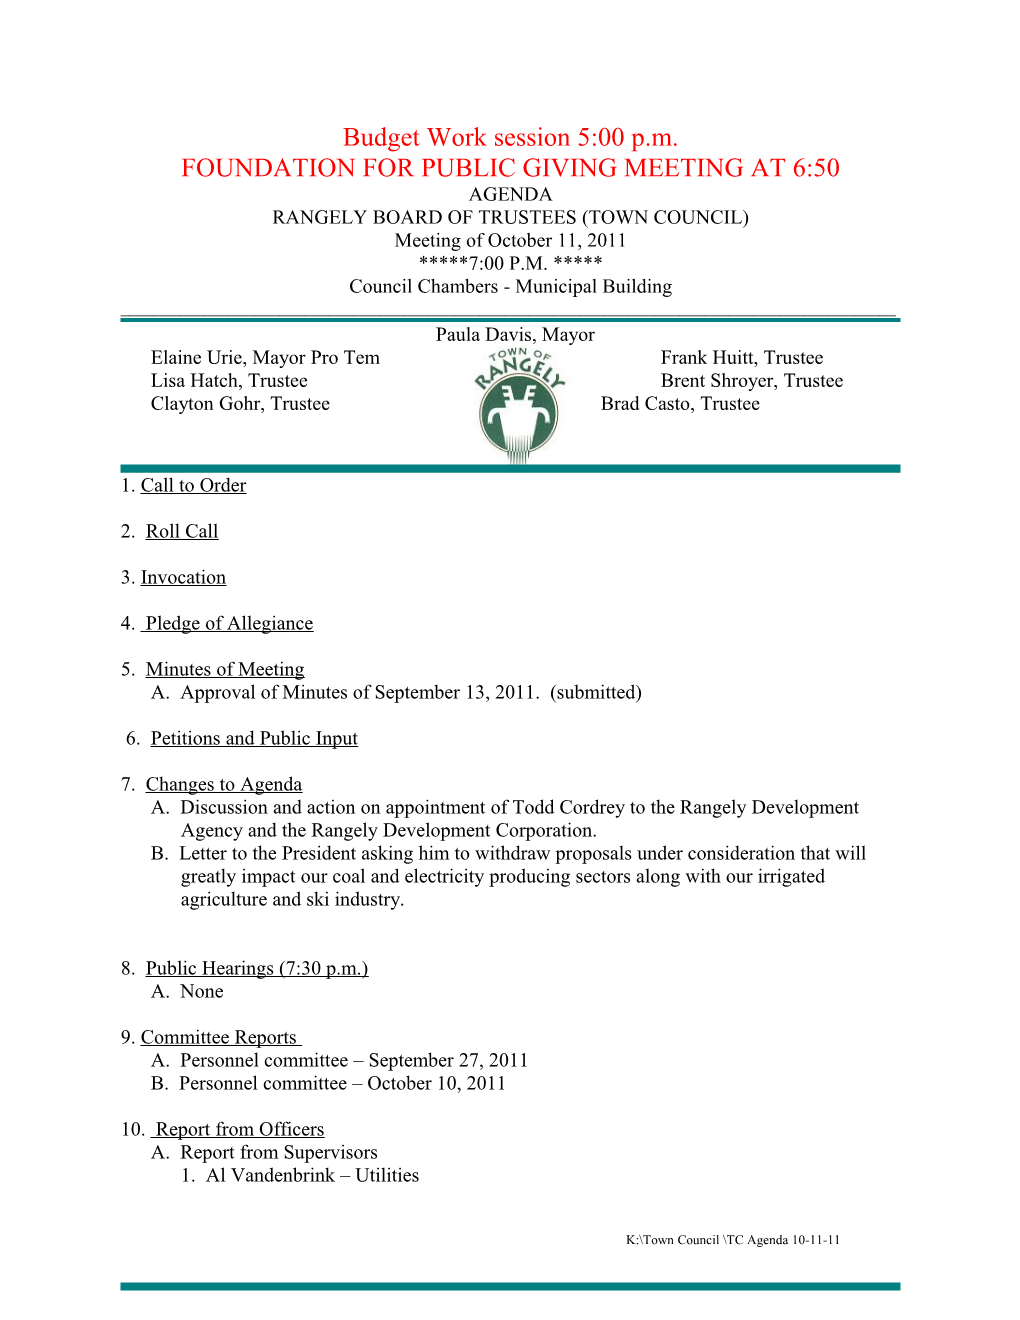 Foundation for Public Giving Meeting at 6:50